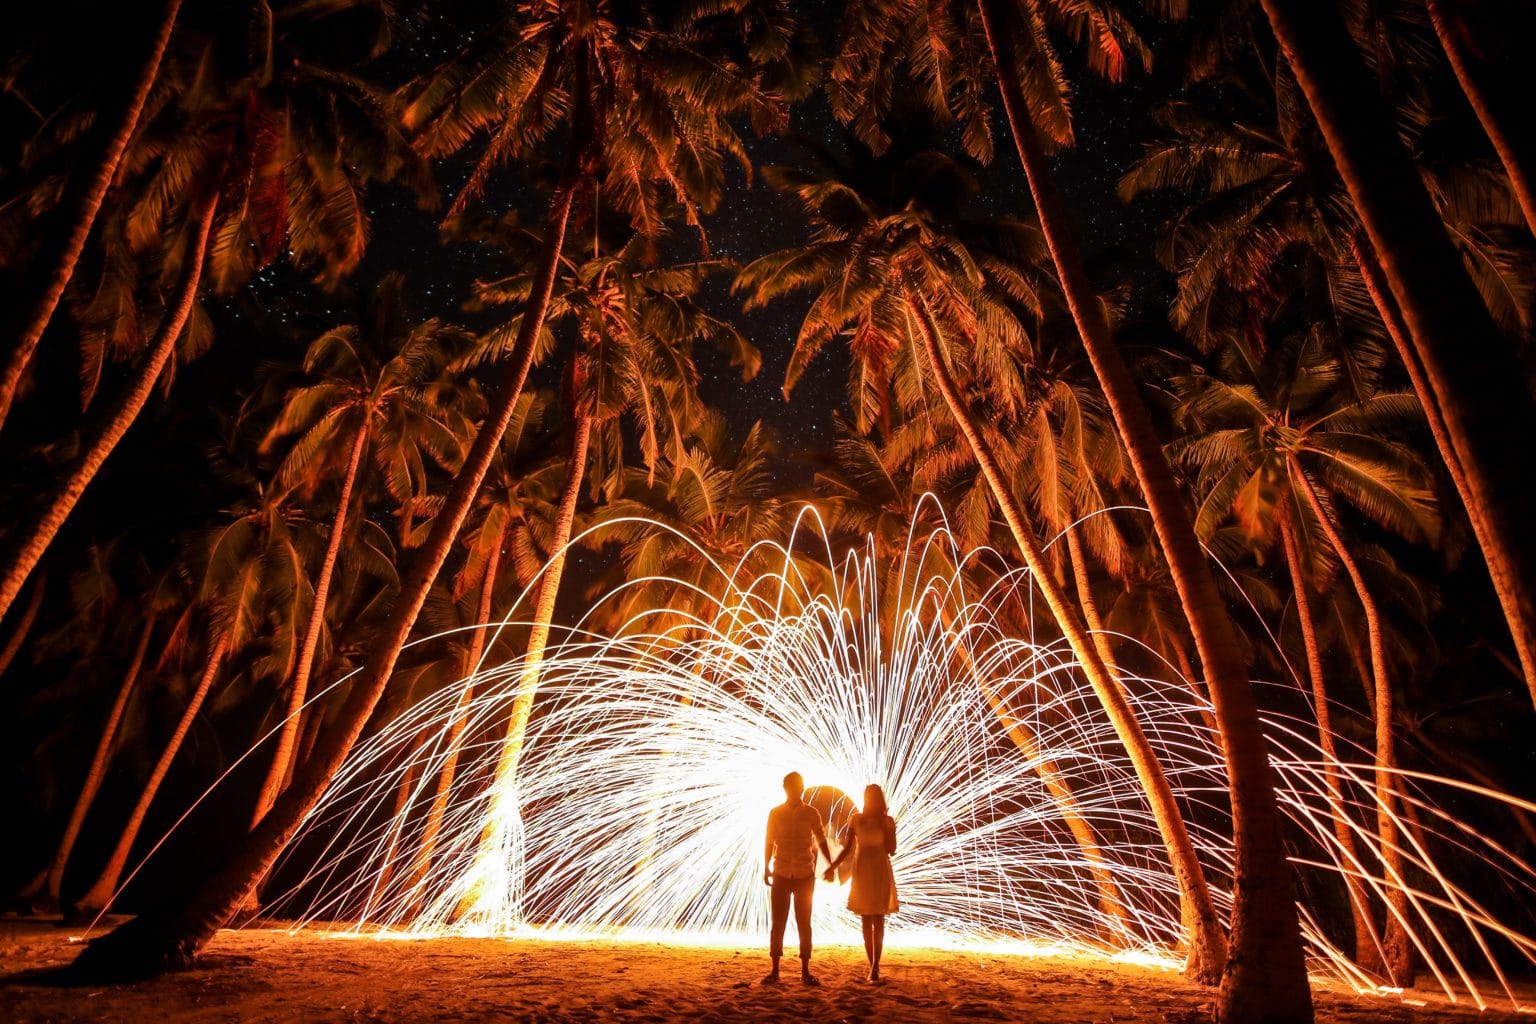 A party in Maldives